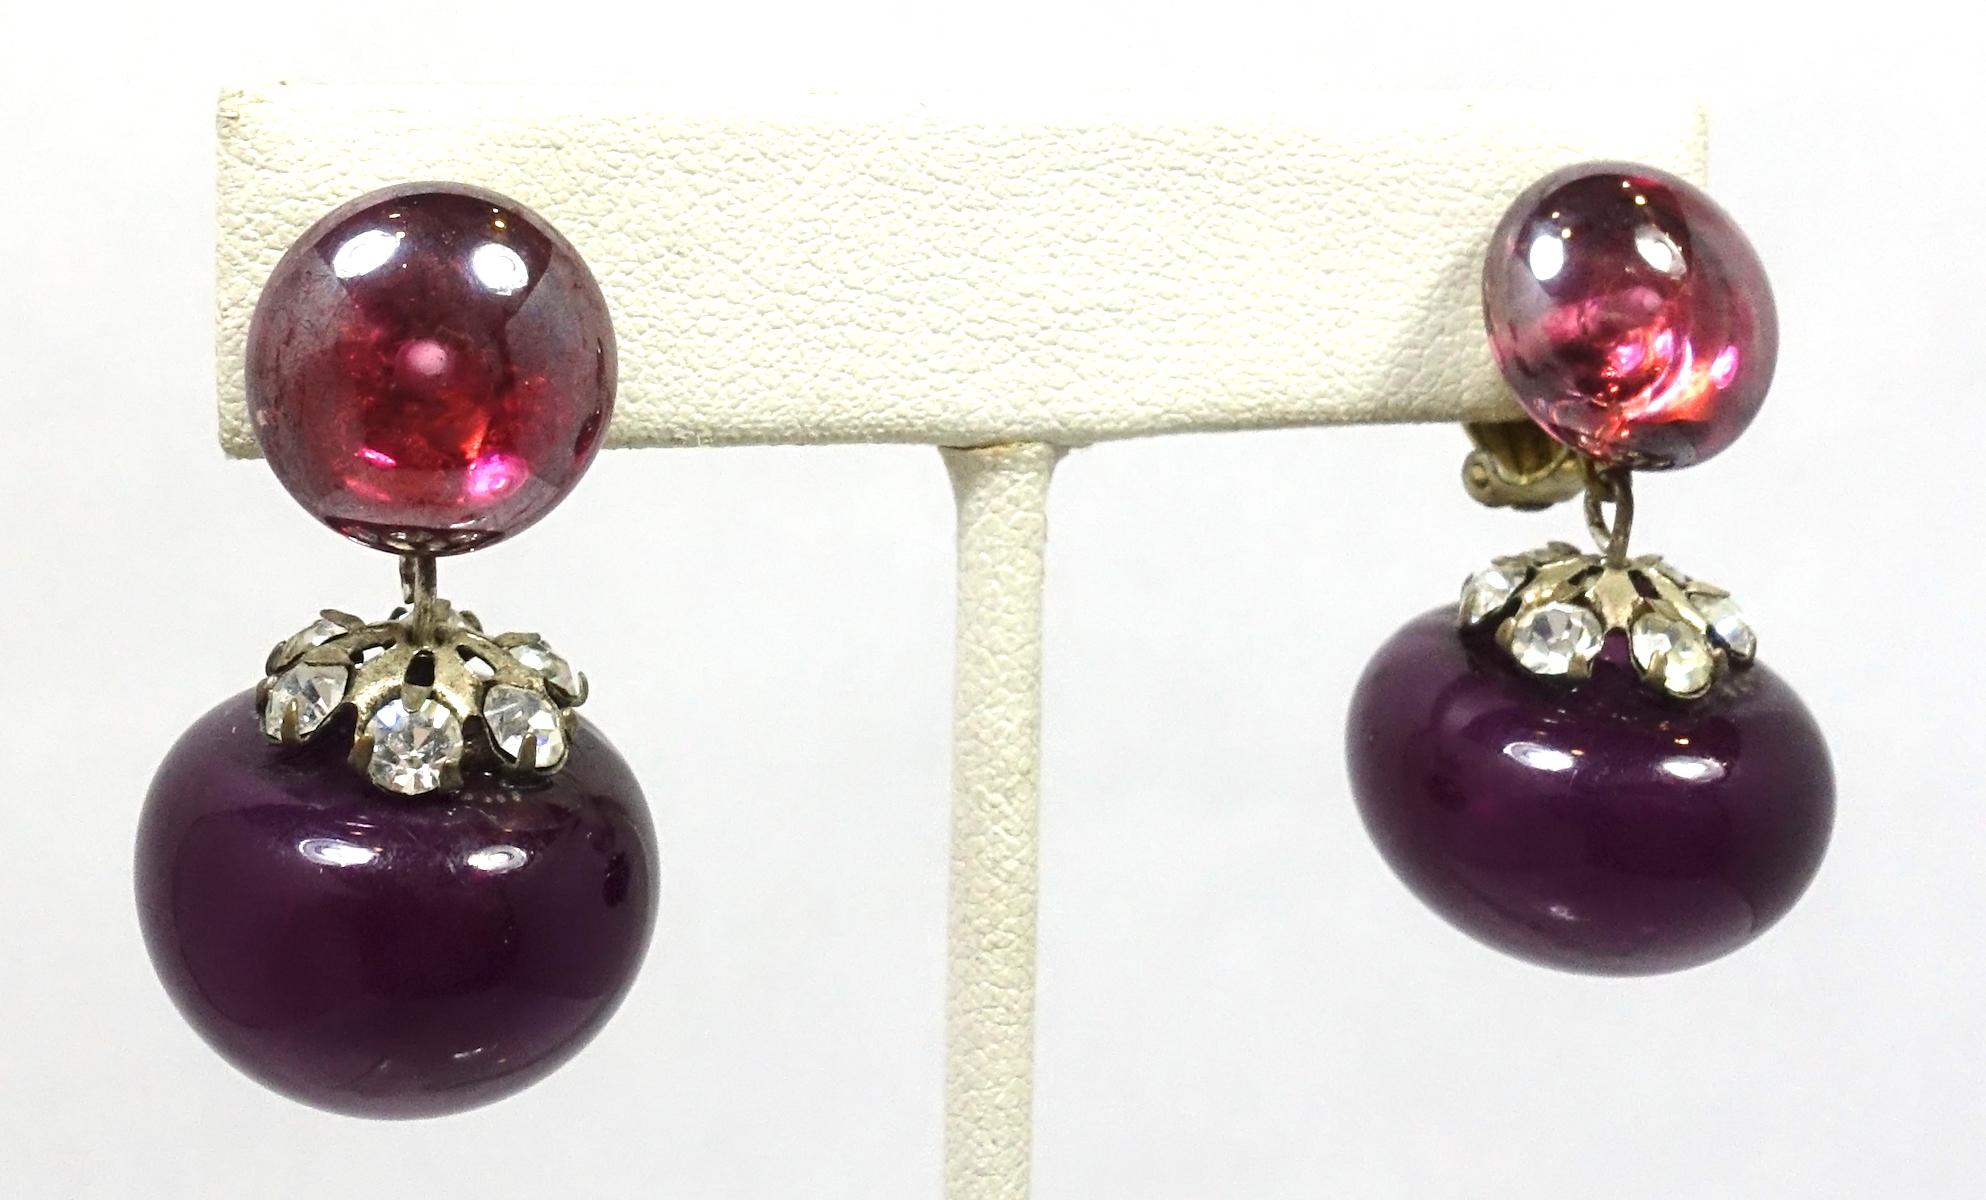 These vintage Art Deco 1920s earrings feature amethyst color drops in a gold tone setting.  In excellent condition, these clip earrings measure 1” x 3/4”.